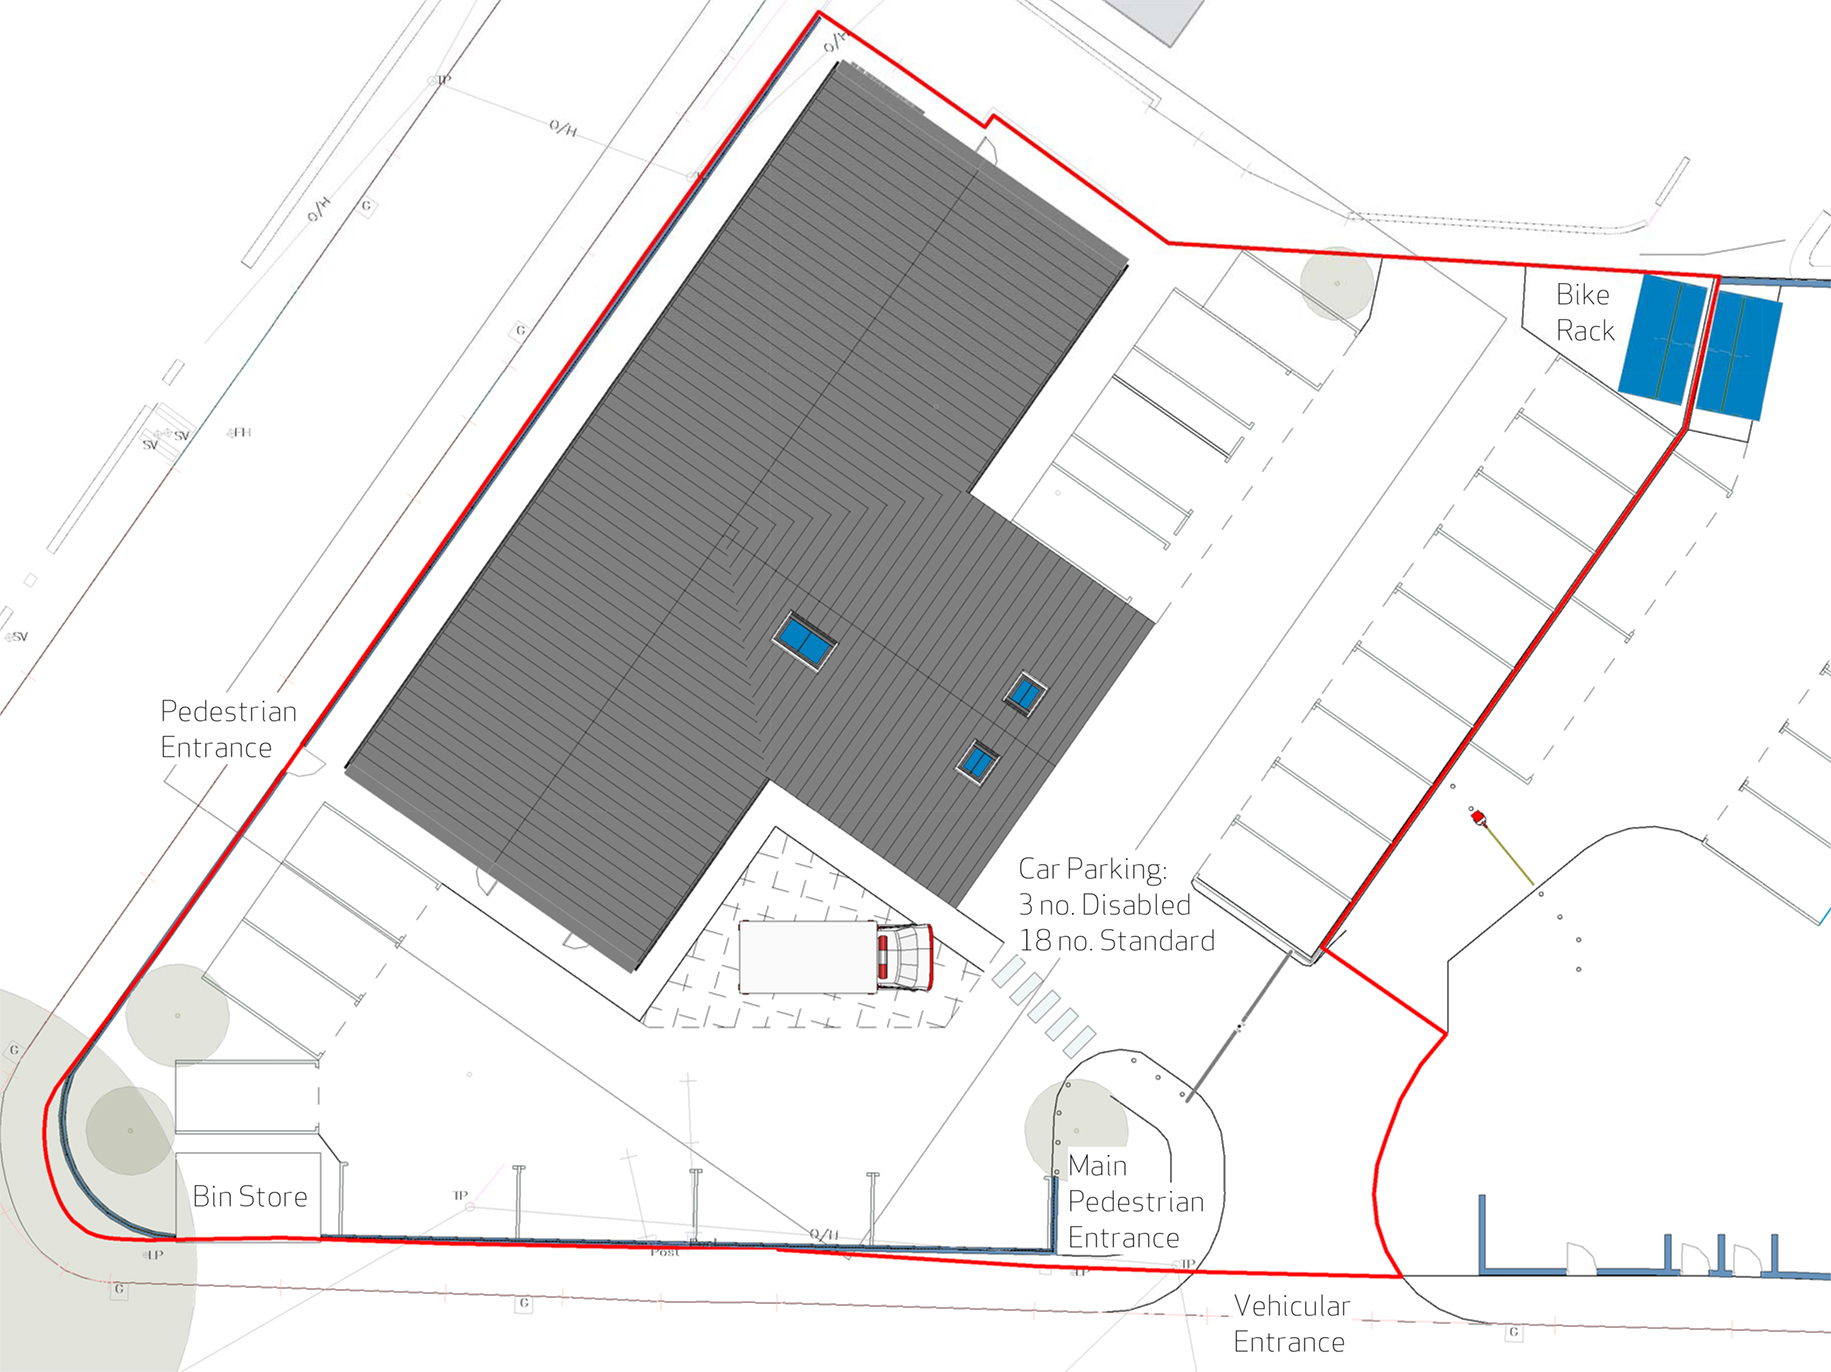 Primary Care Health Centre, Llanbradach, Wales - Site Plan